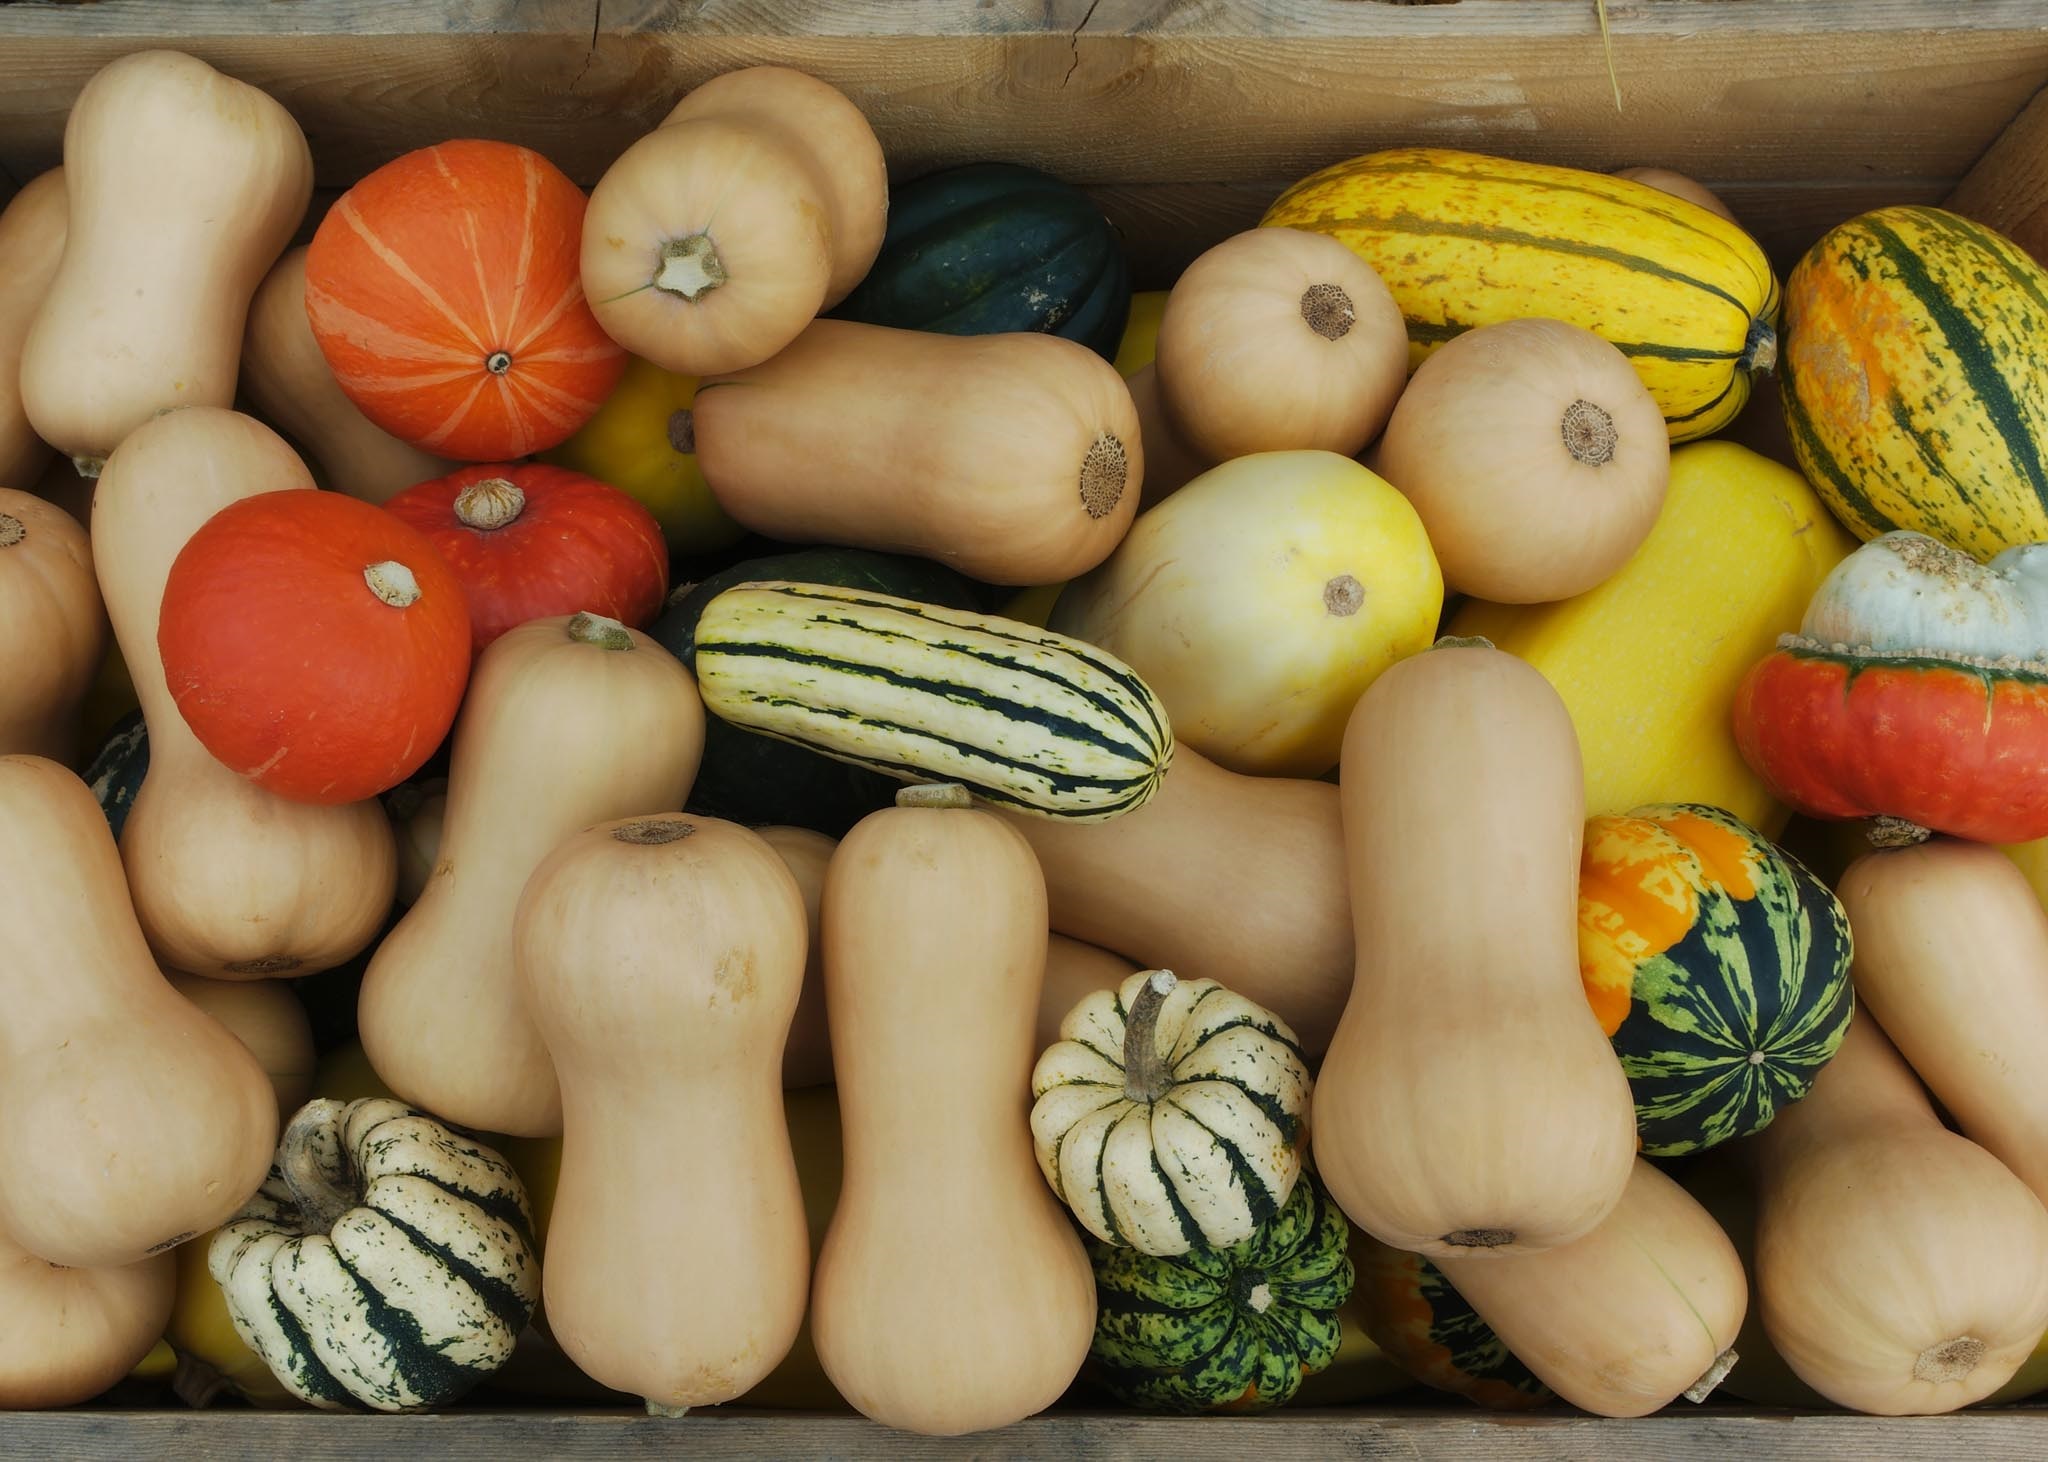 Photo of variety of winter squash including butternut, acorn, and delicata